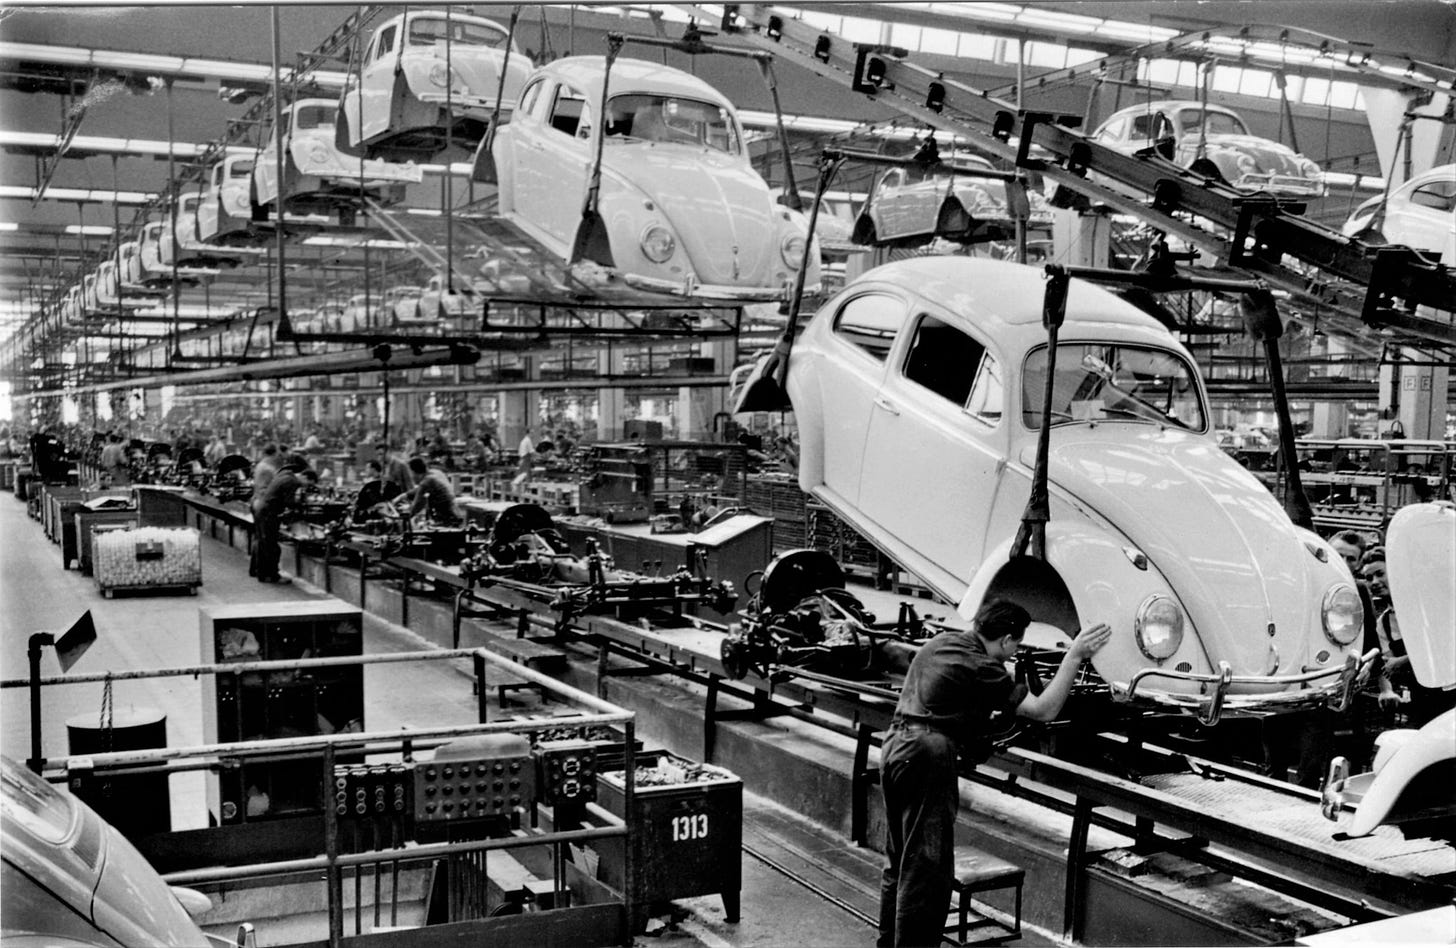 A black-and-white photo of a vintage Volkswagen Beetle factory asembly line.